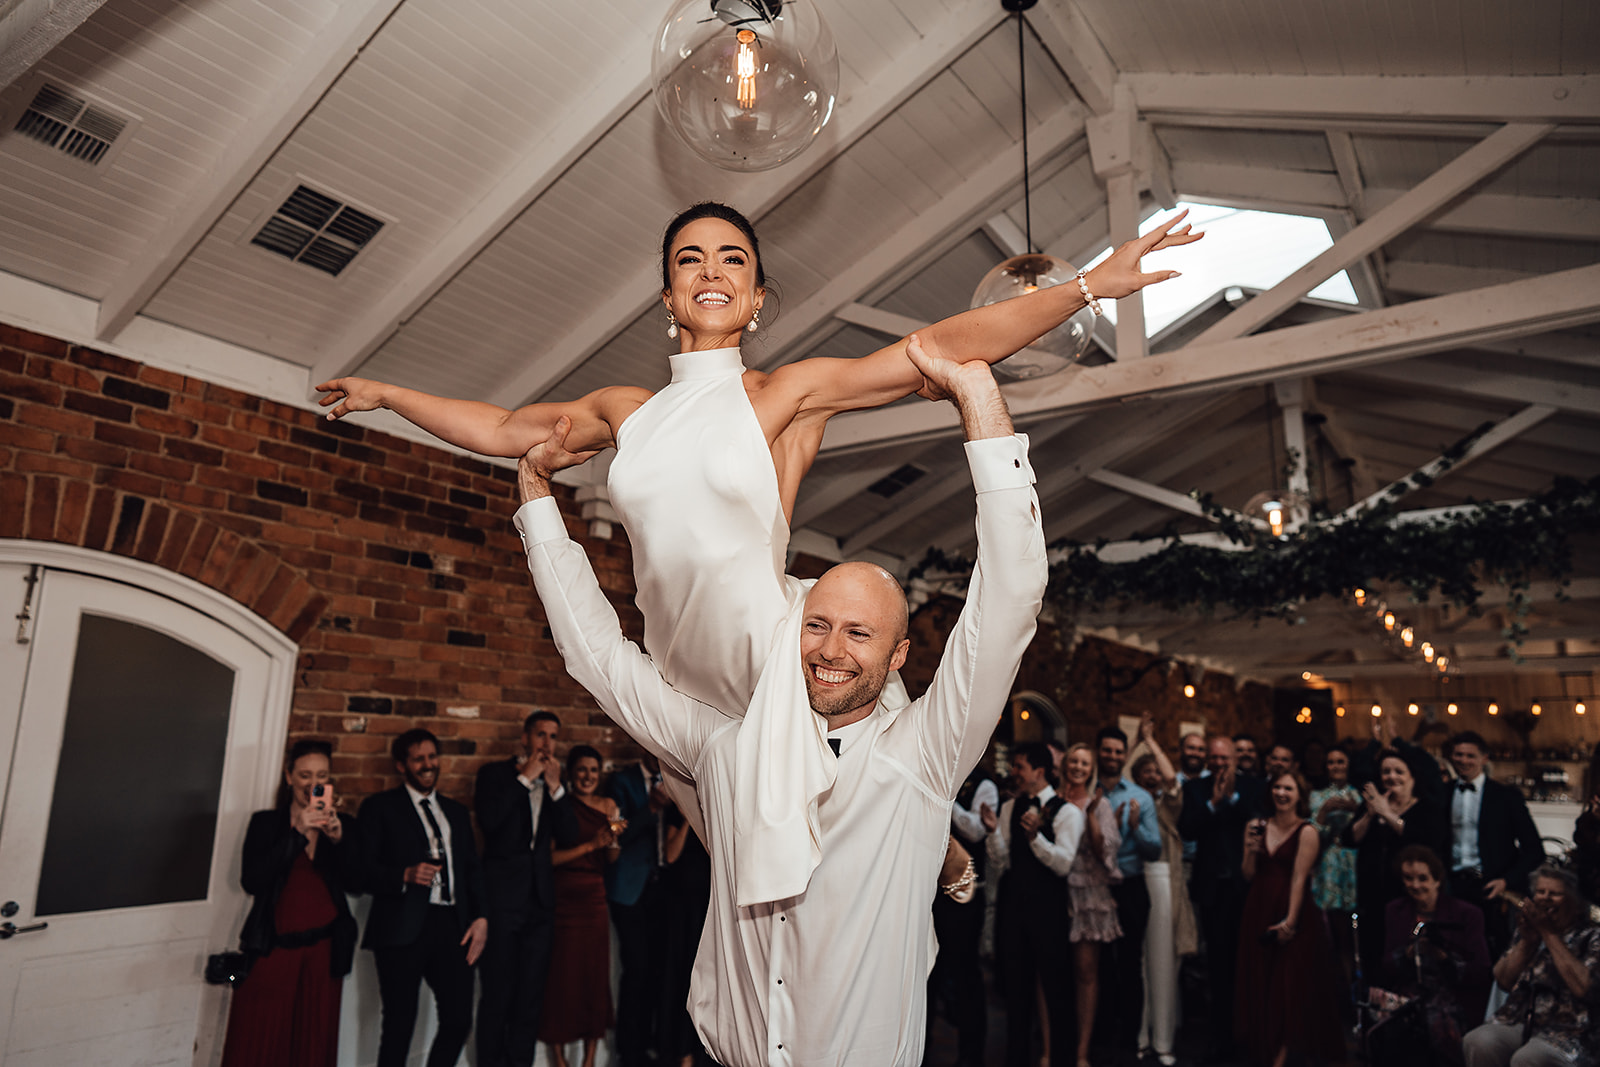 An epic lift during the first dance at The Farm Yarra Valley in Melbourne, Victoria